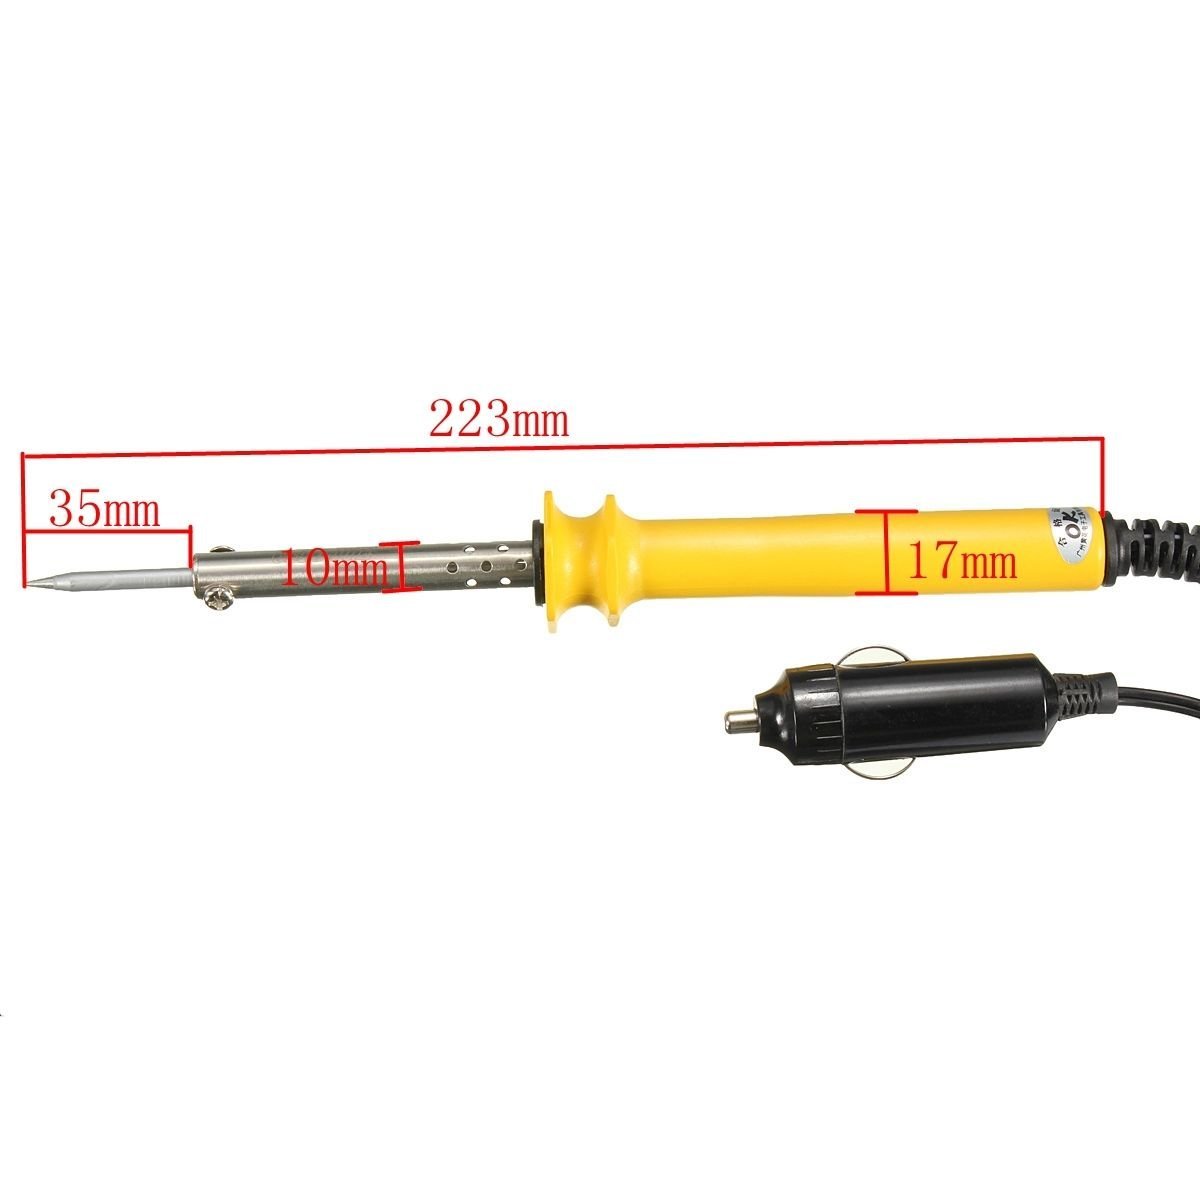 GJ-DC-12V-30W-Low-Voltage-Bevel-eEectric-Soldering-Iron-Fitted-with-Cigarette-Lighter-Plug-for-Auto--1135259-3